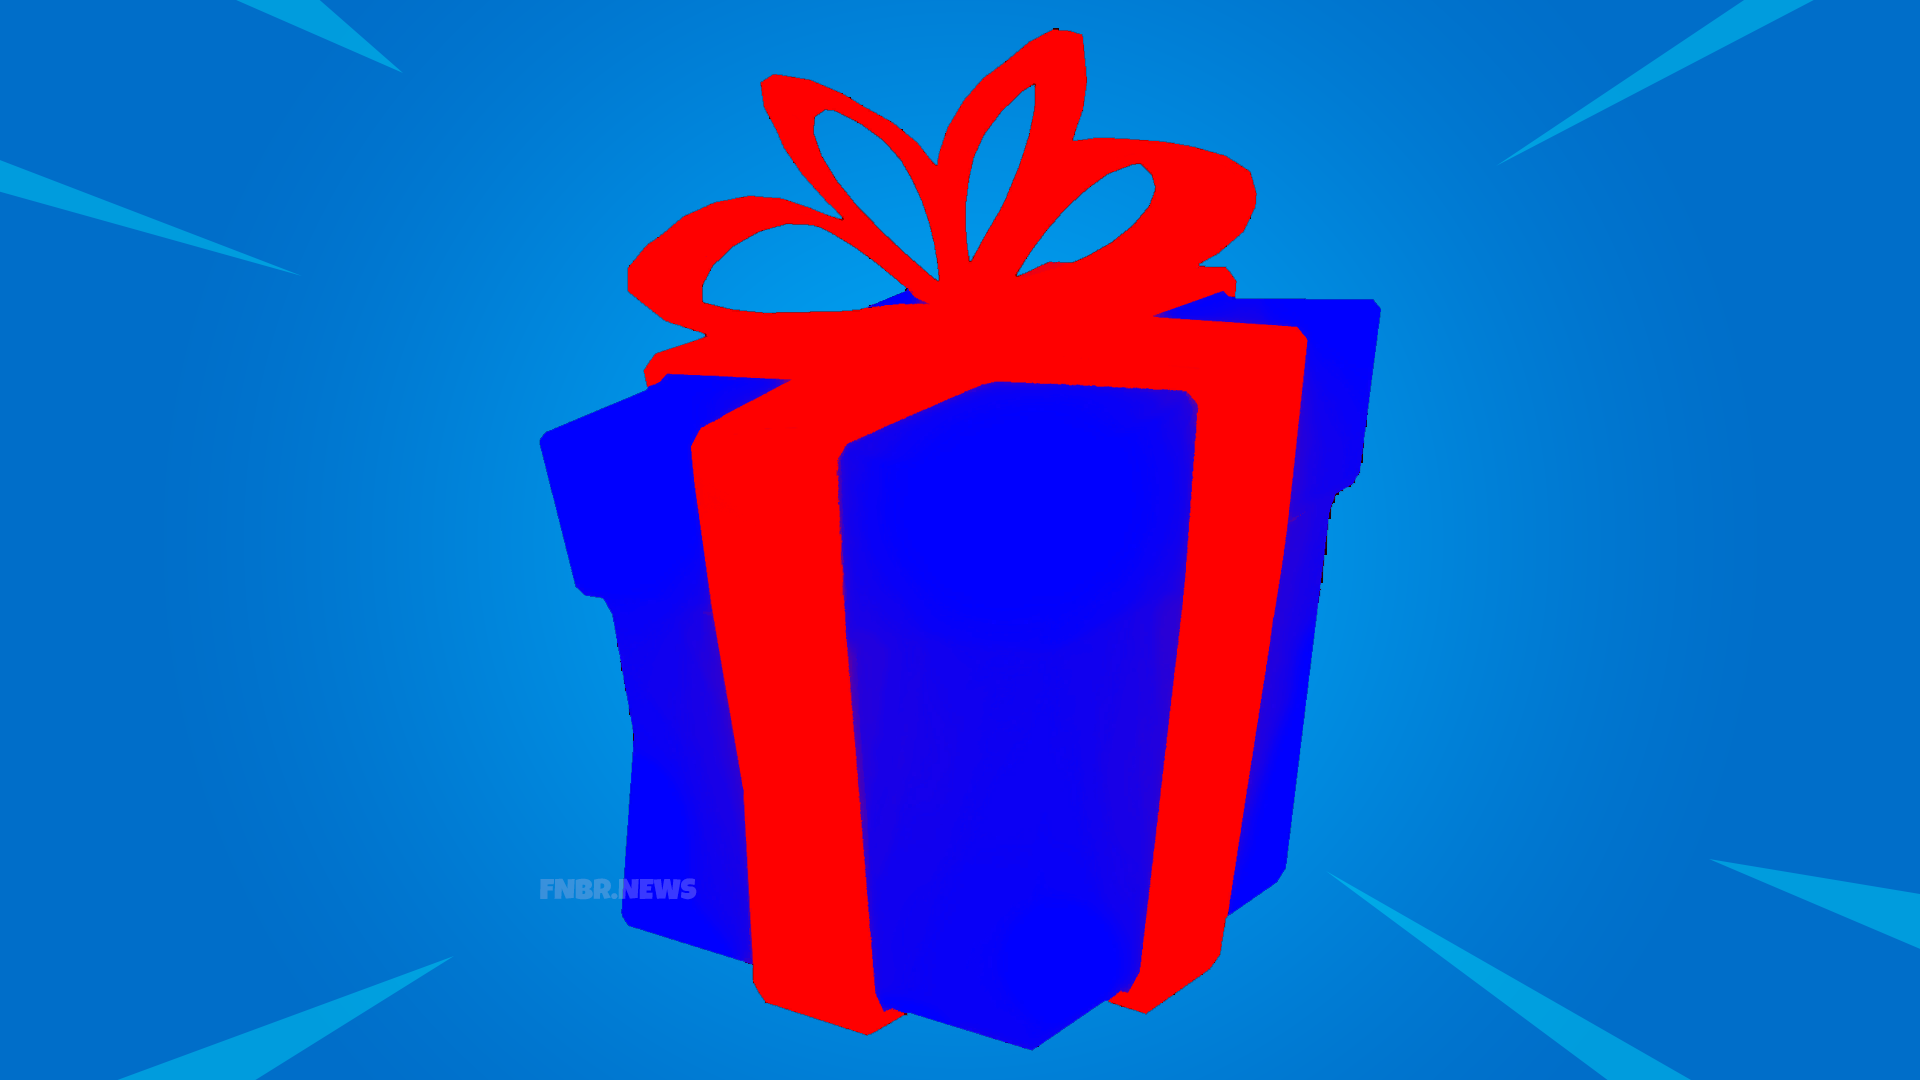 Fortnite gifting system information leaked, won't be available on iOS